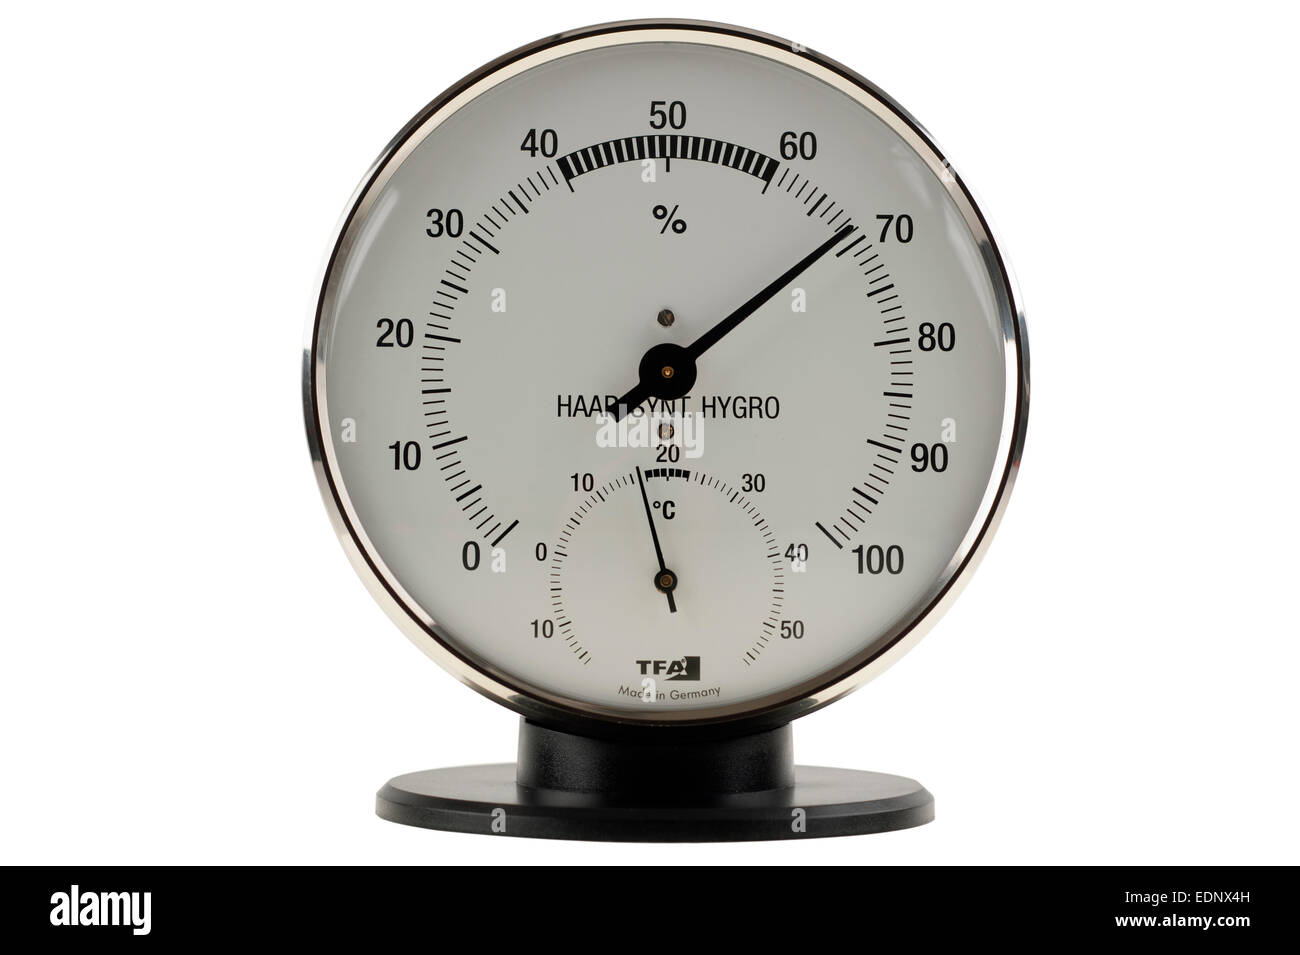 https://c8.alamy.com/comp/EDNX4H/high-humidity-shown-on-a-hygrometer-dial-EDNX4H.jpg